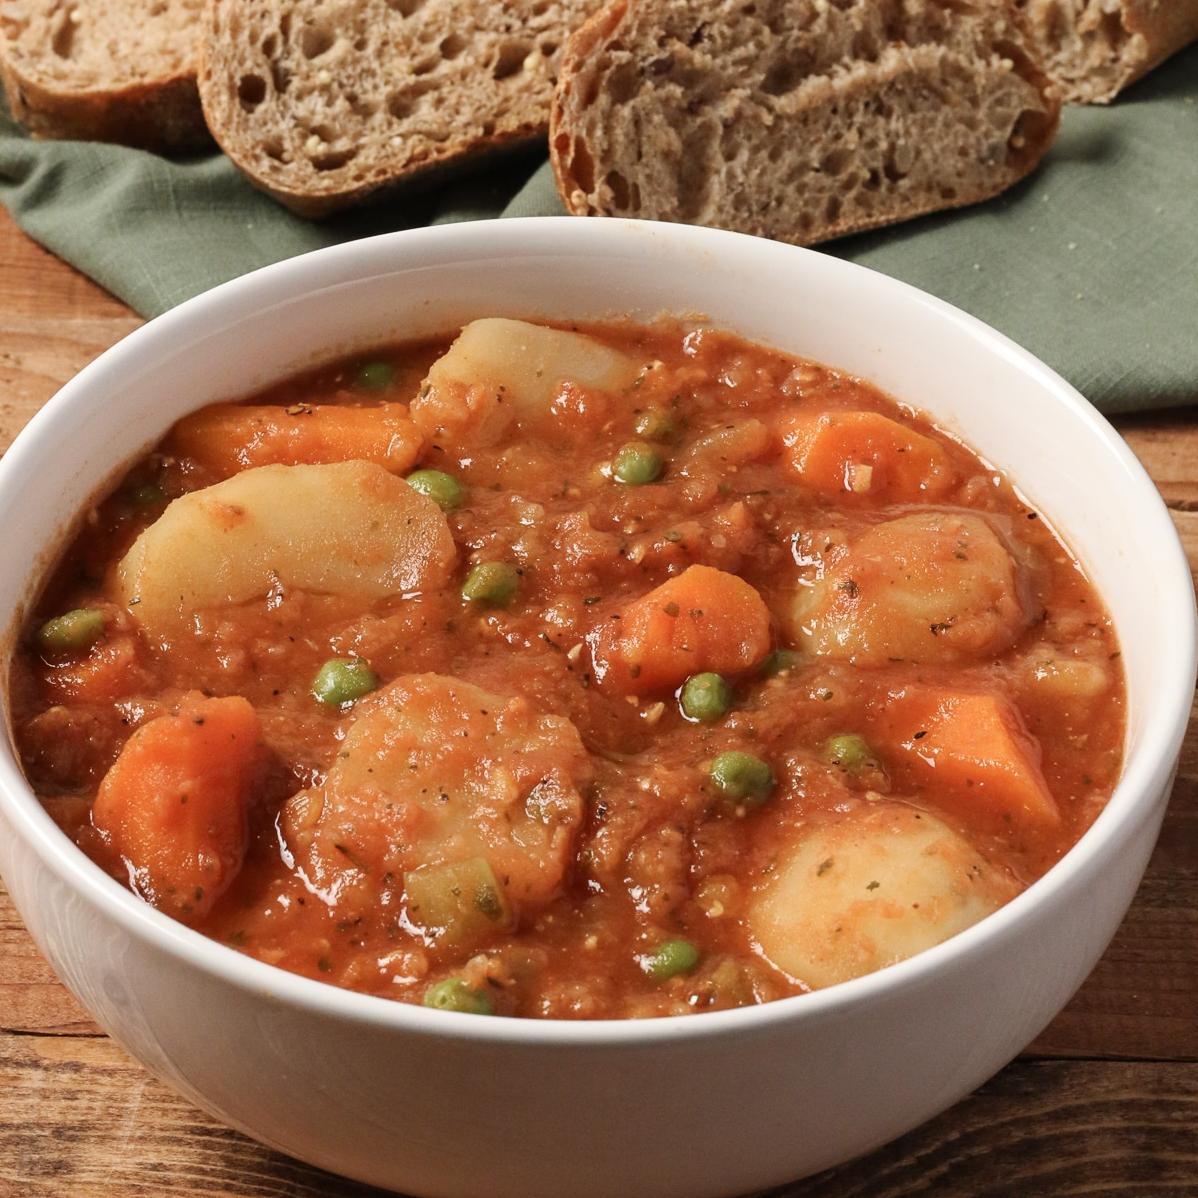  Warm up with this hearty, veggie-packed stew.